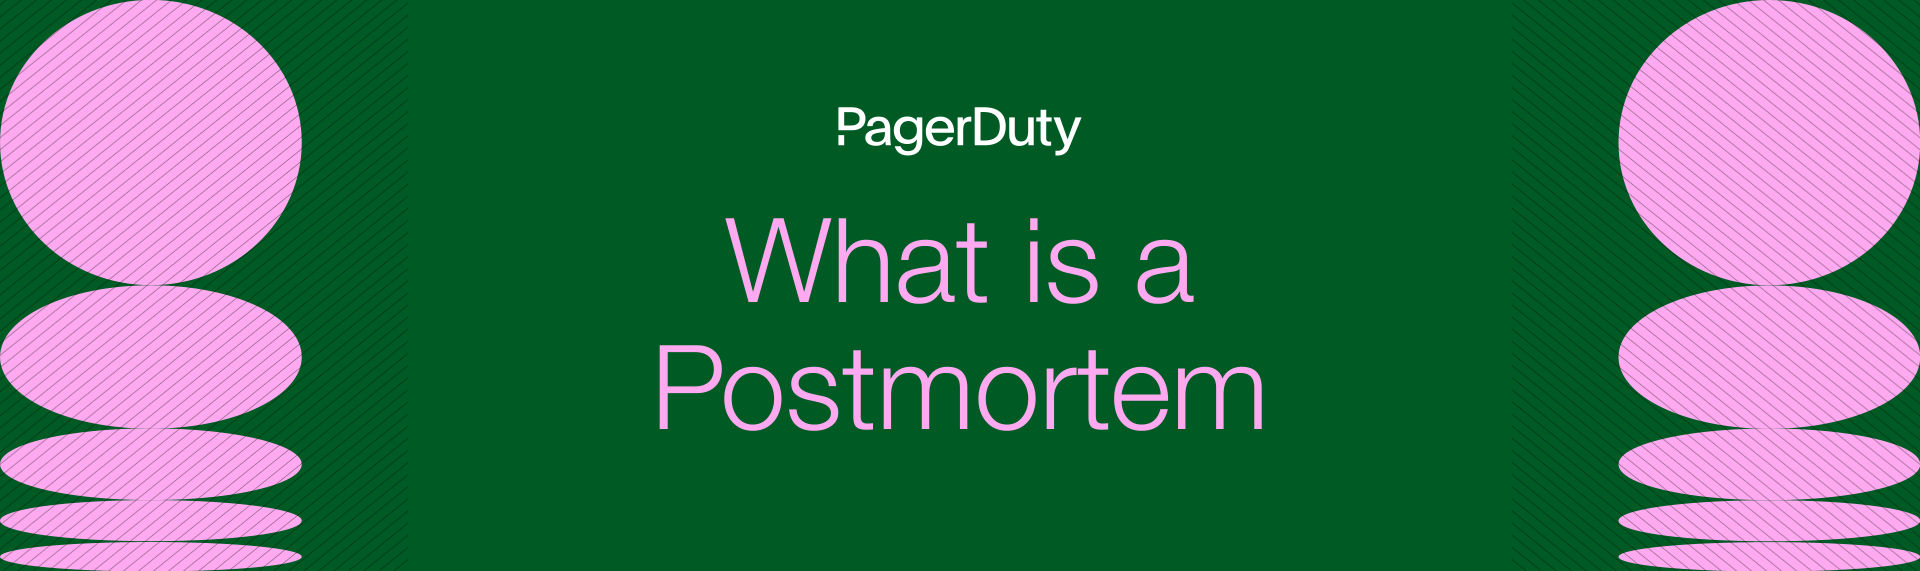 What is a Postmortem?